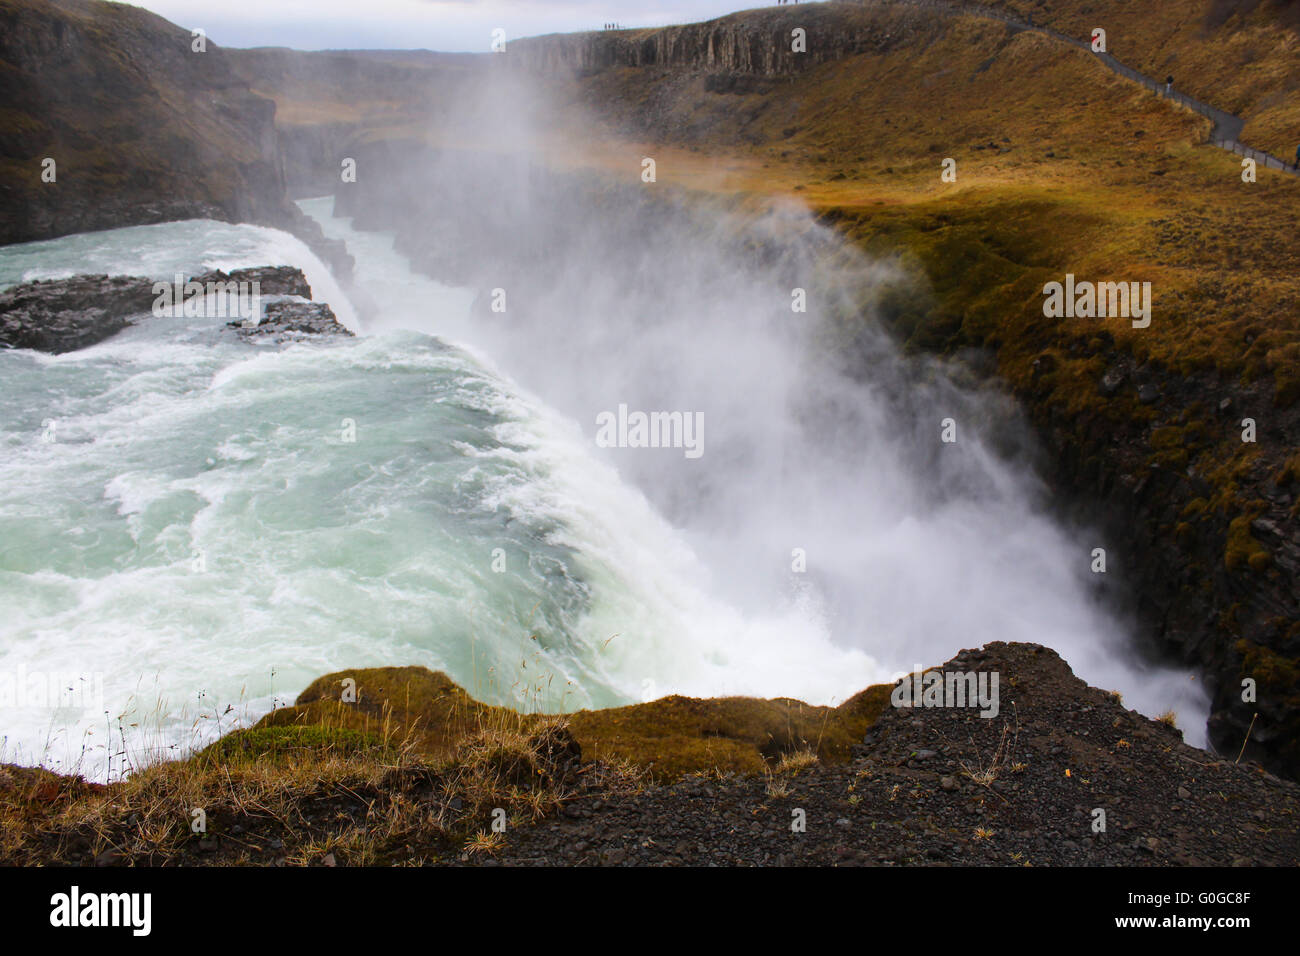 Gullfoss Waterfall, part of the Golden Circle Tour & one of Iceland's most popular tourist attractions Stock Photo